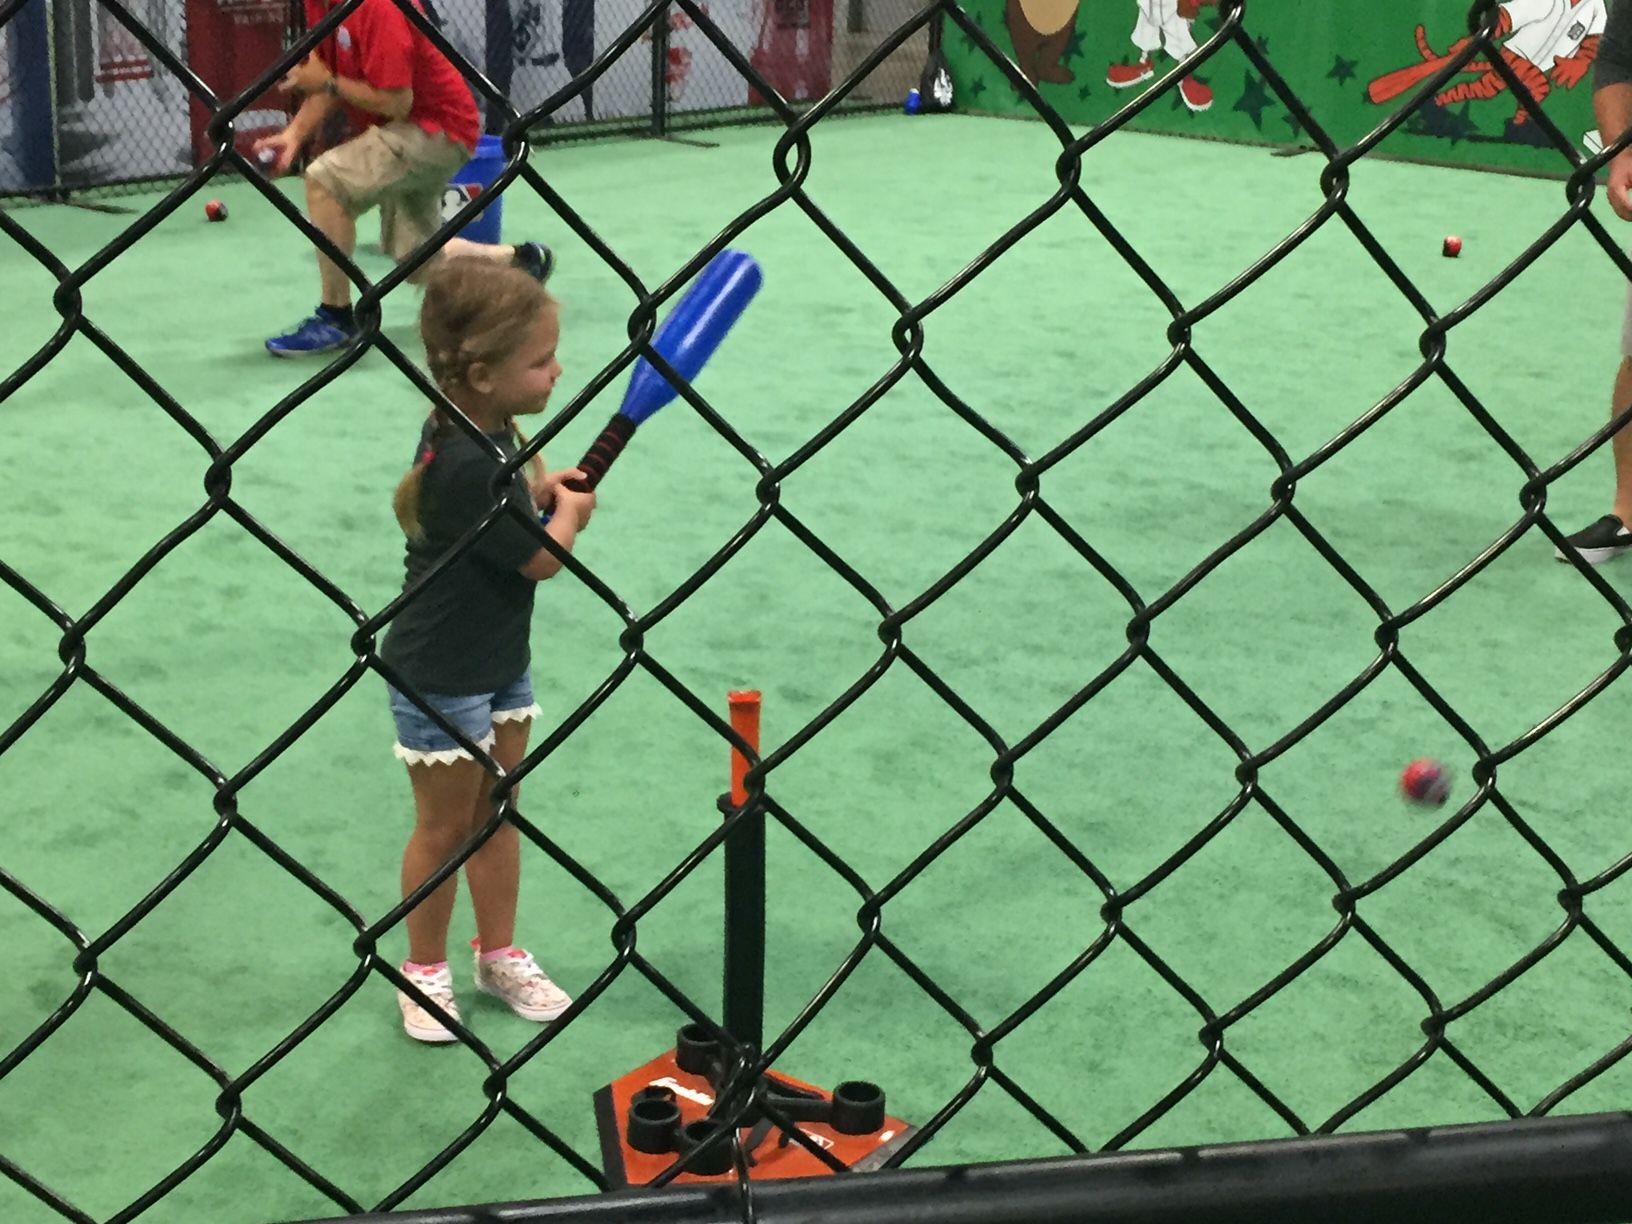 On one end of the hall were batting cages, where fans were able to take some hacks from off a pitching machine. On another, there were cages synced up to measure bat speed. There was even a virtual reality home run derby. (WTOP/John Domen)